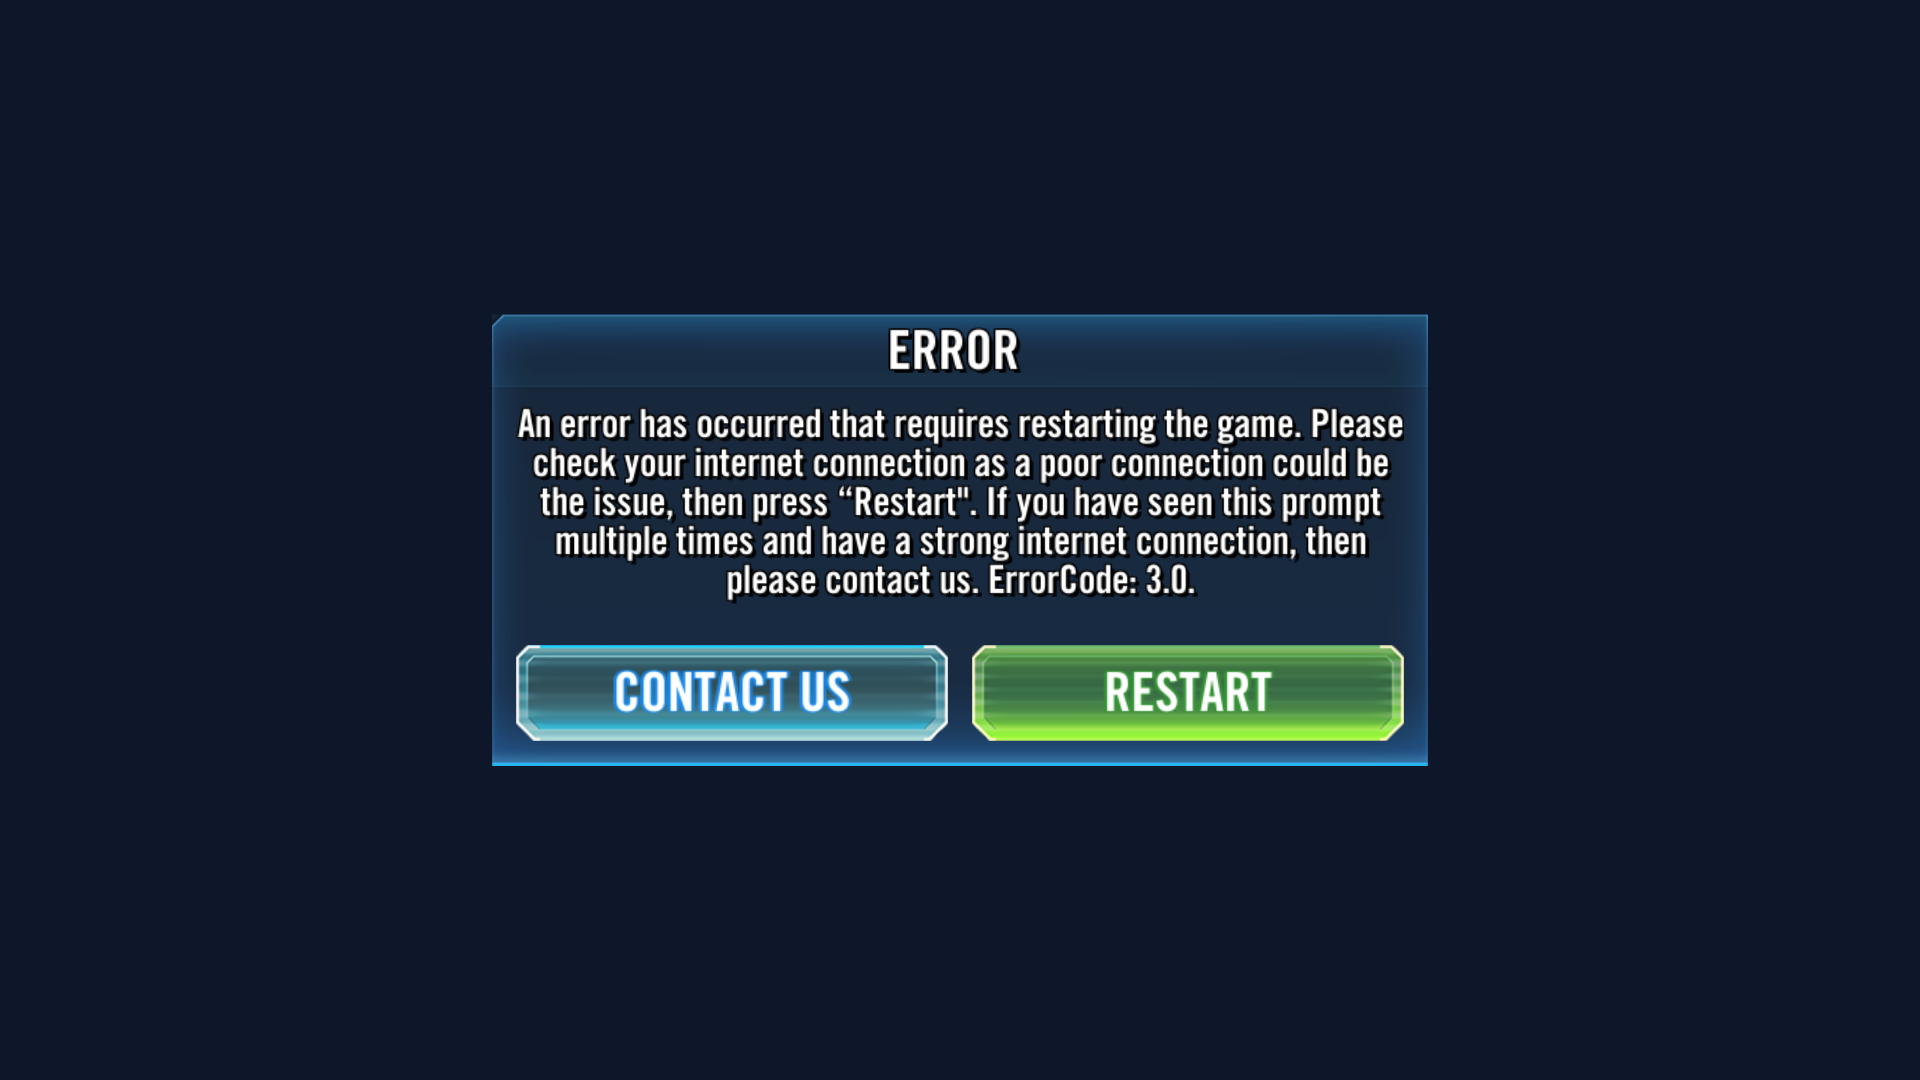 Restart the Game
Close the game and restart it to see if the error disappears.